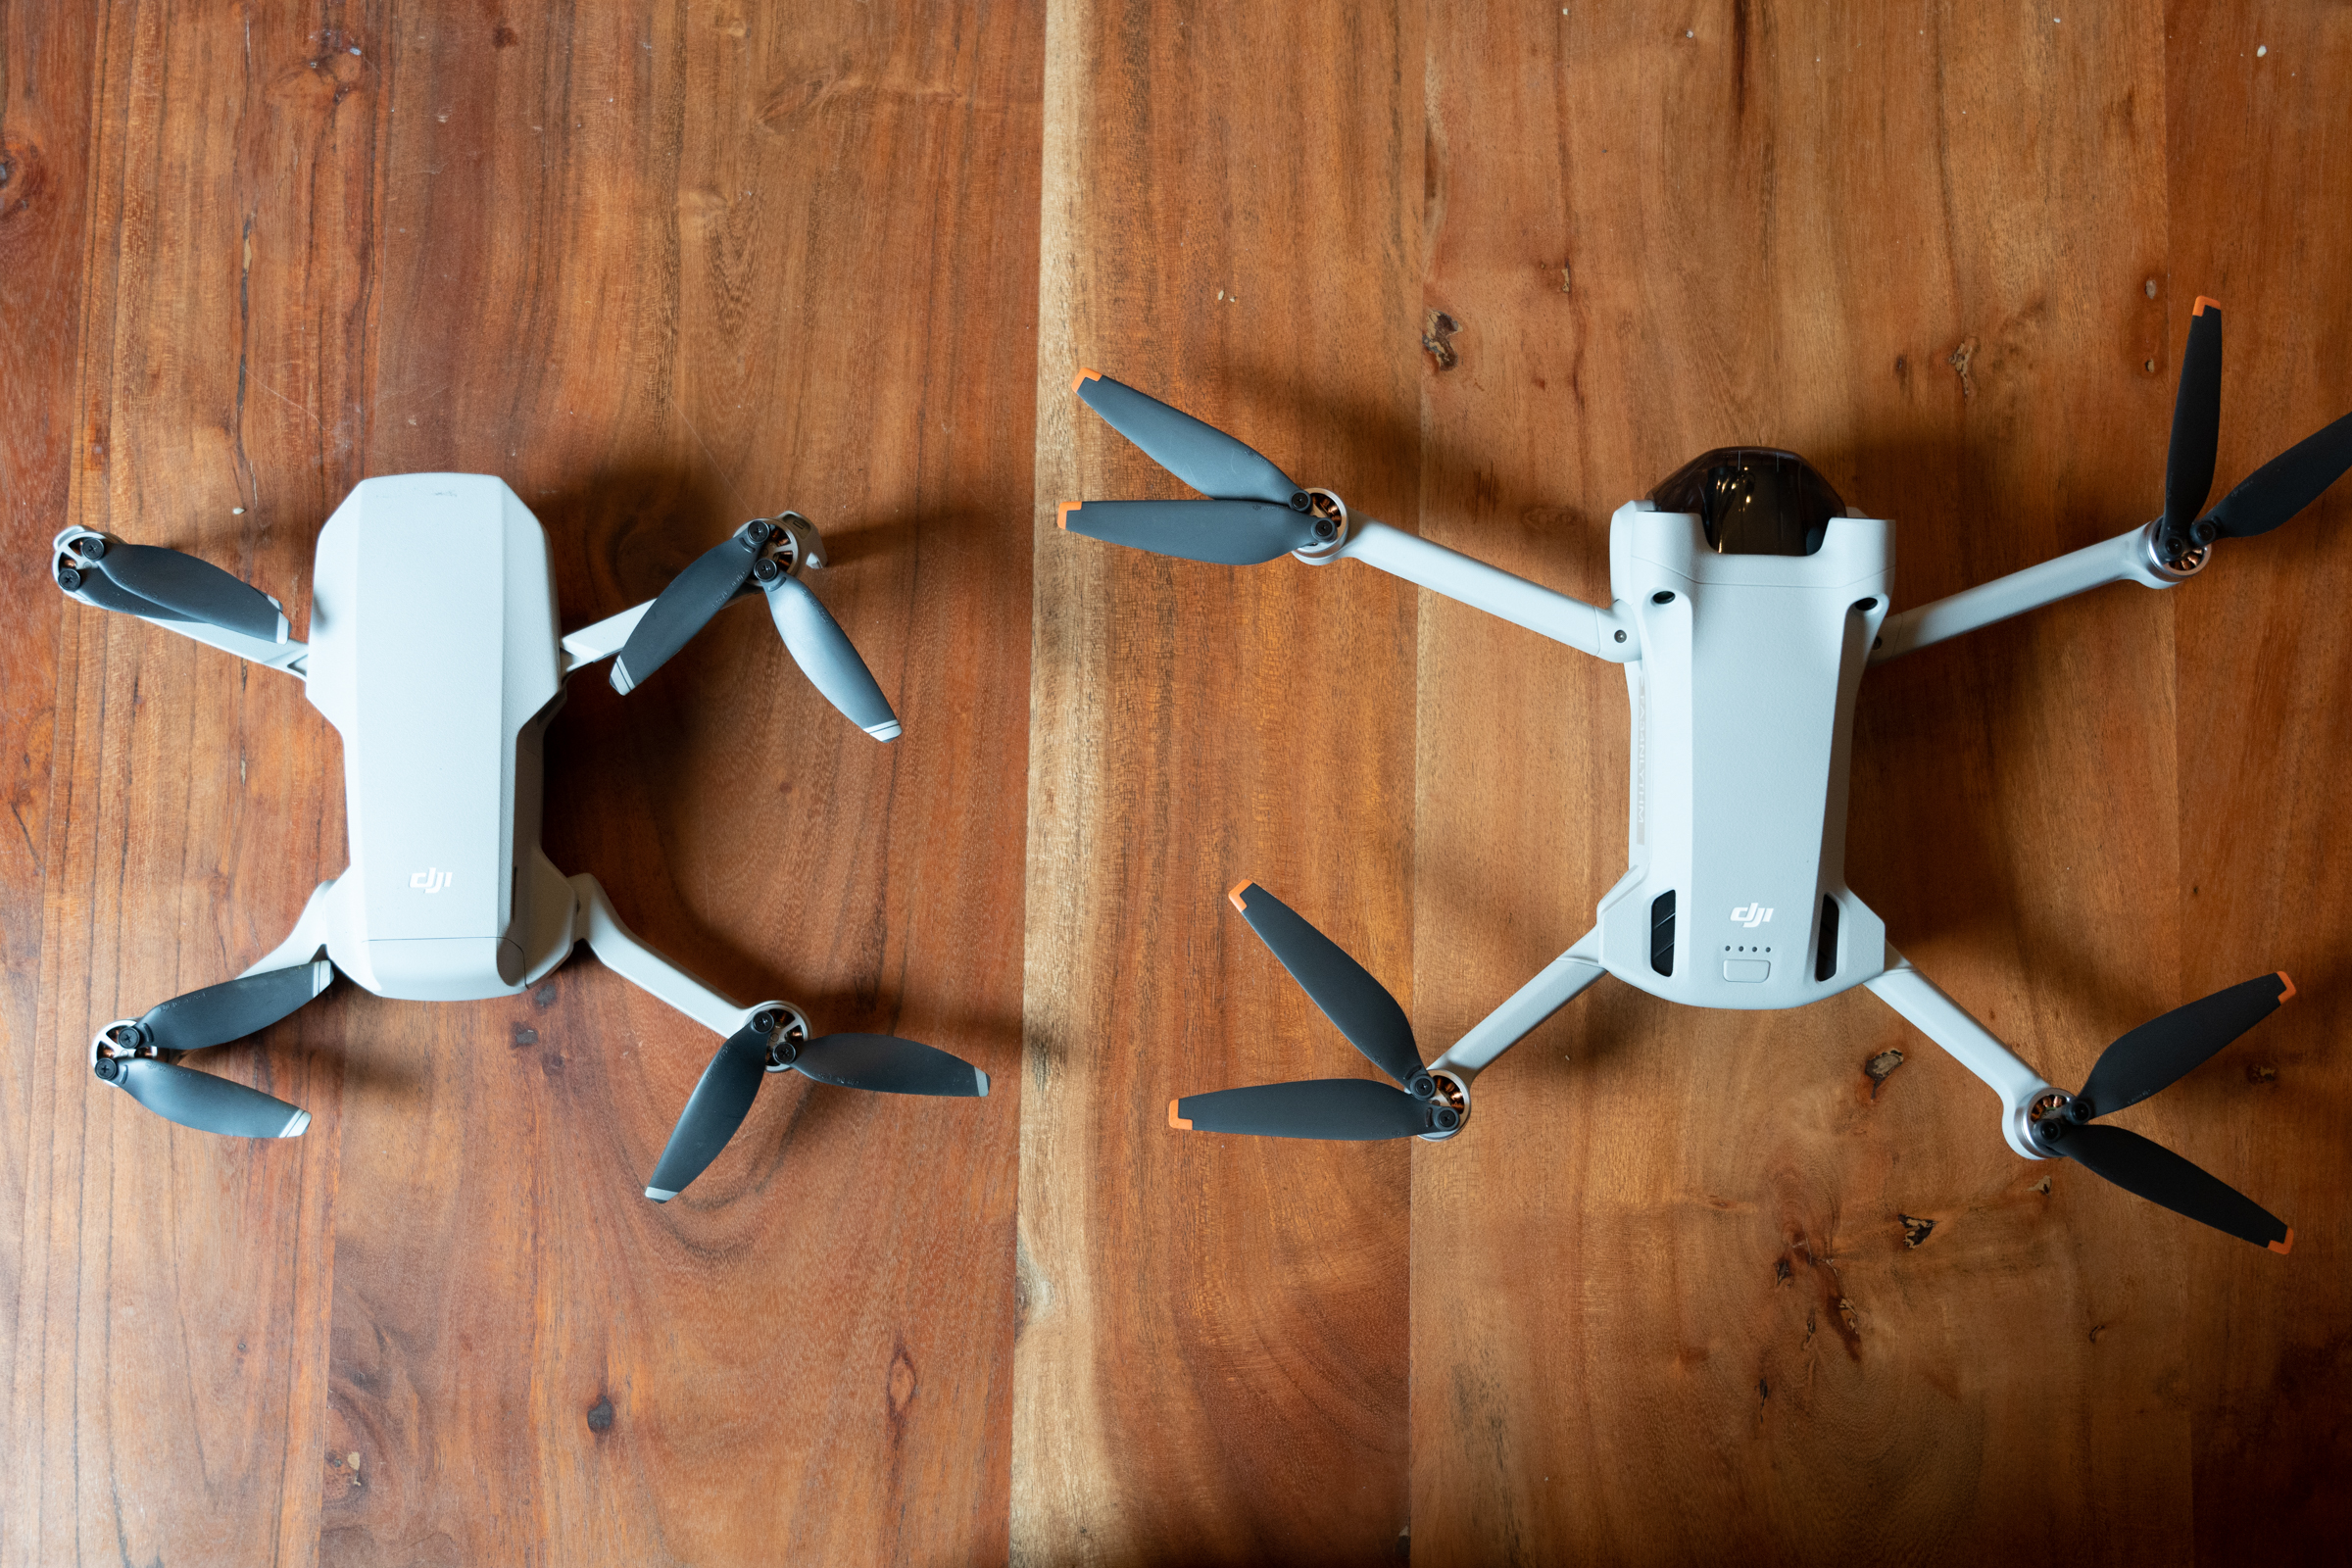 Ventilere bud At håndtere DJI's new Mini 3 Pro drone hits the aerial photography sweet spot |  TechCrunch